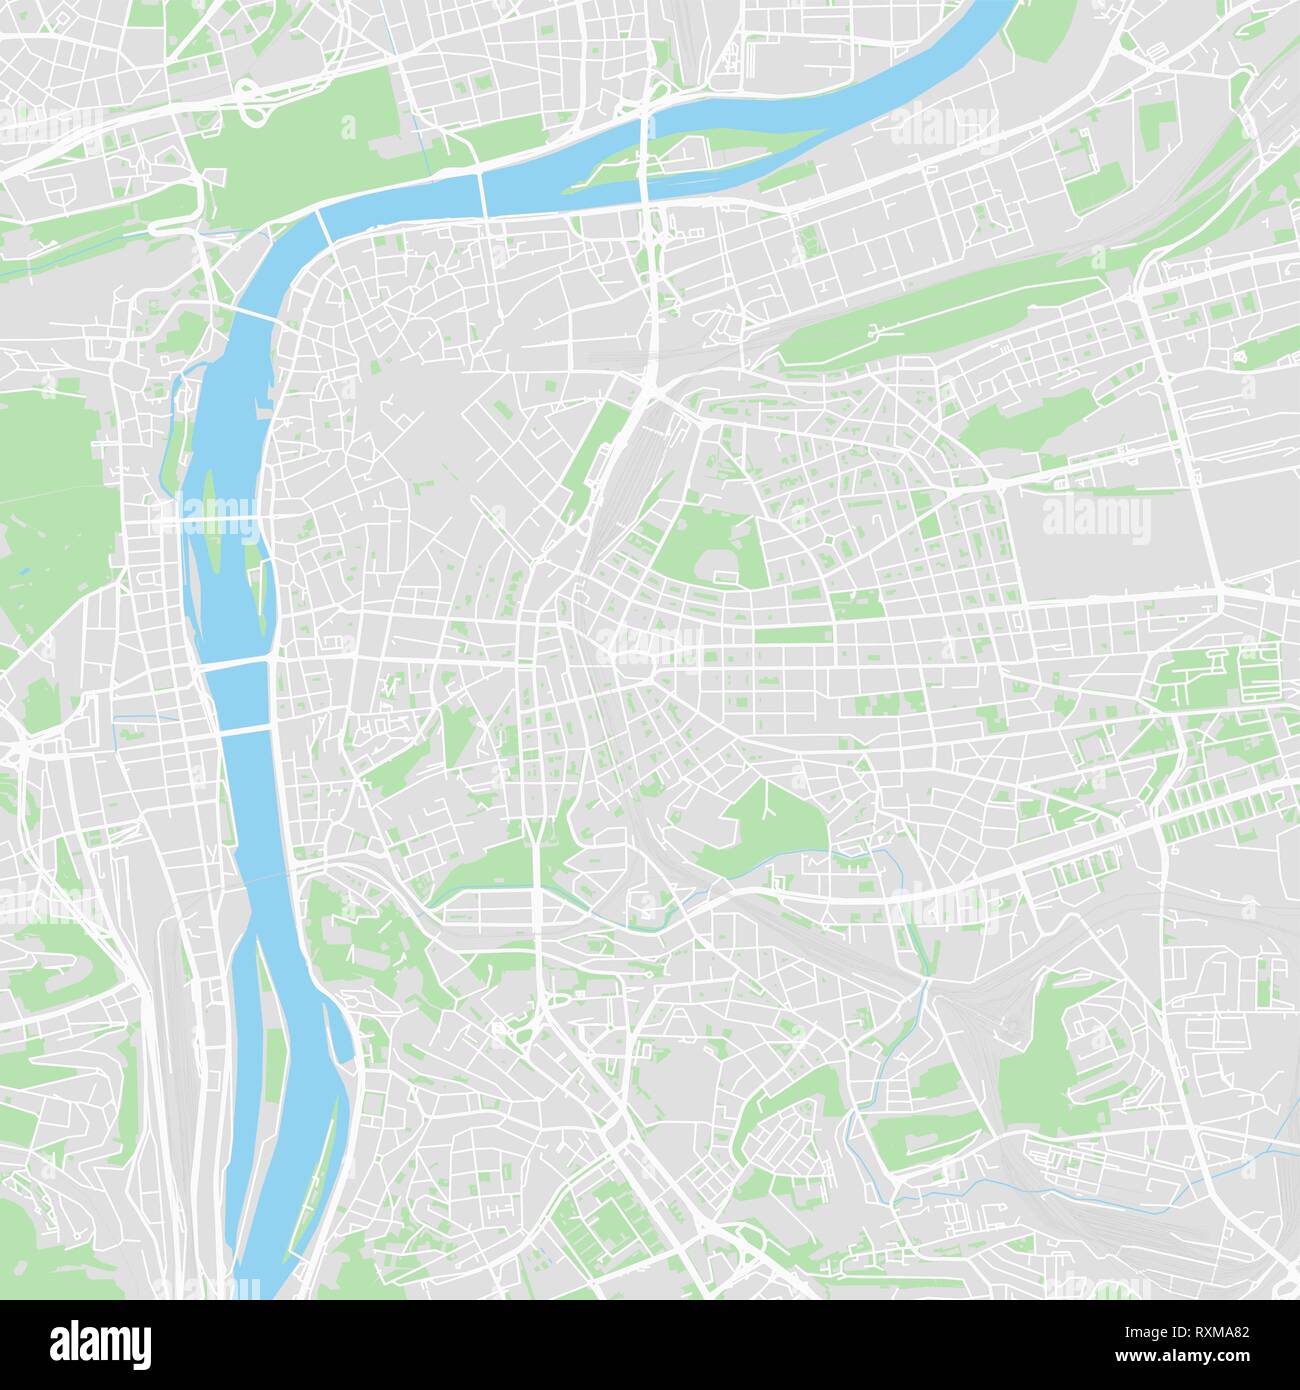 Downtown vector map of Prague, Czech Republic. This printable map ...